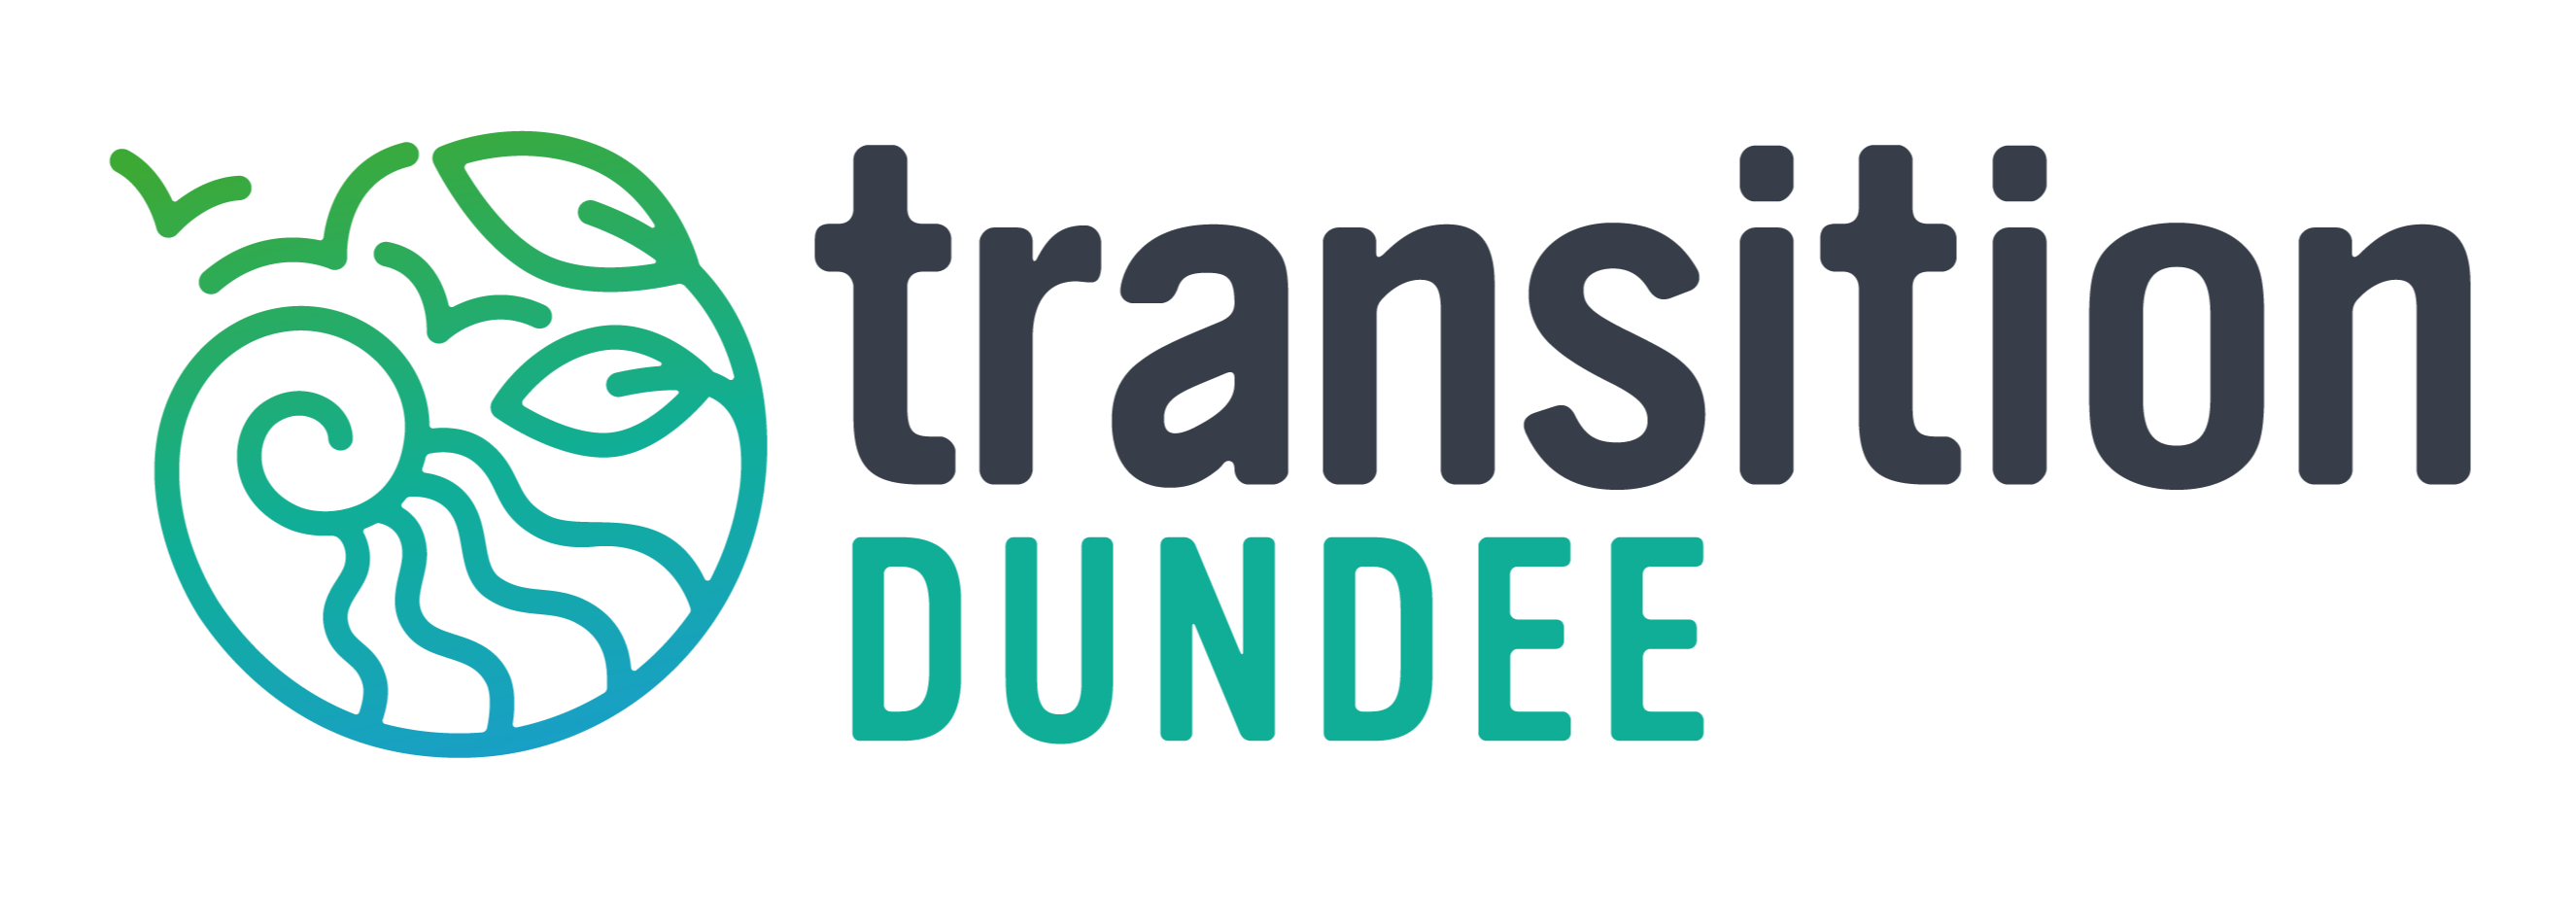 Transition Dundee logo